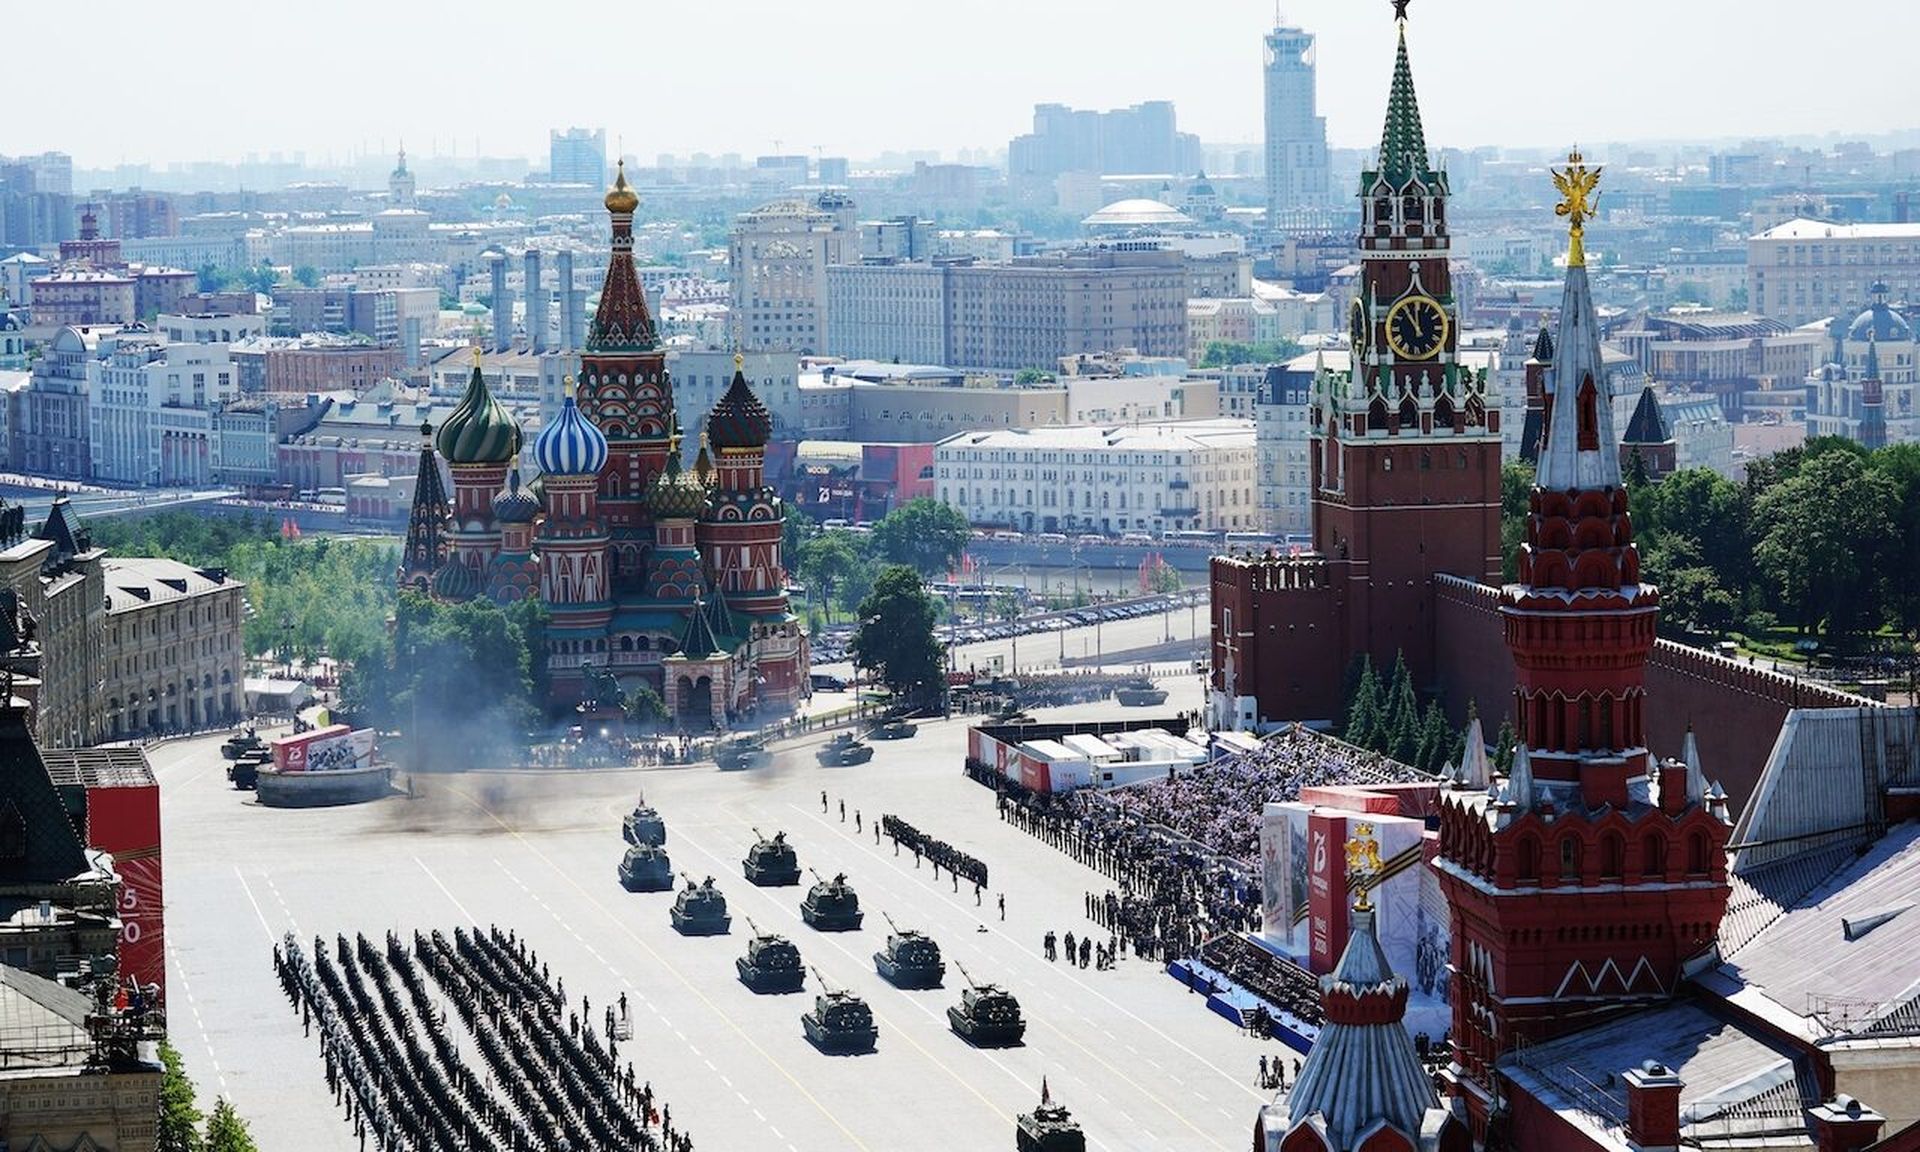 A general view during the Victory Day military parade in Red Square. (Photo by Alexander Vilf &#8211; Host Photo Agency via Getty Images )